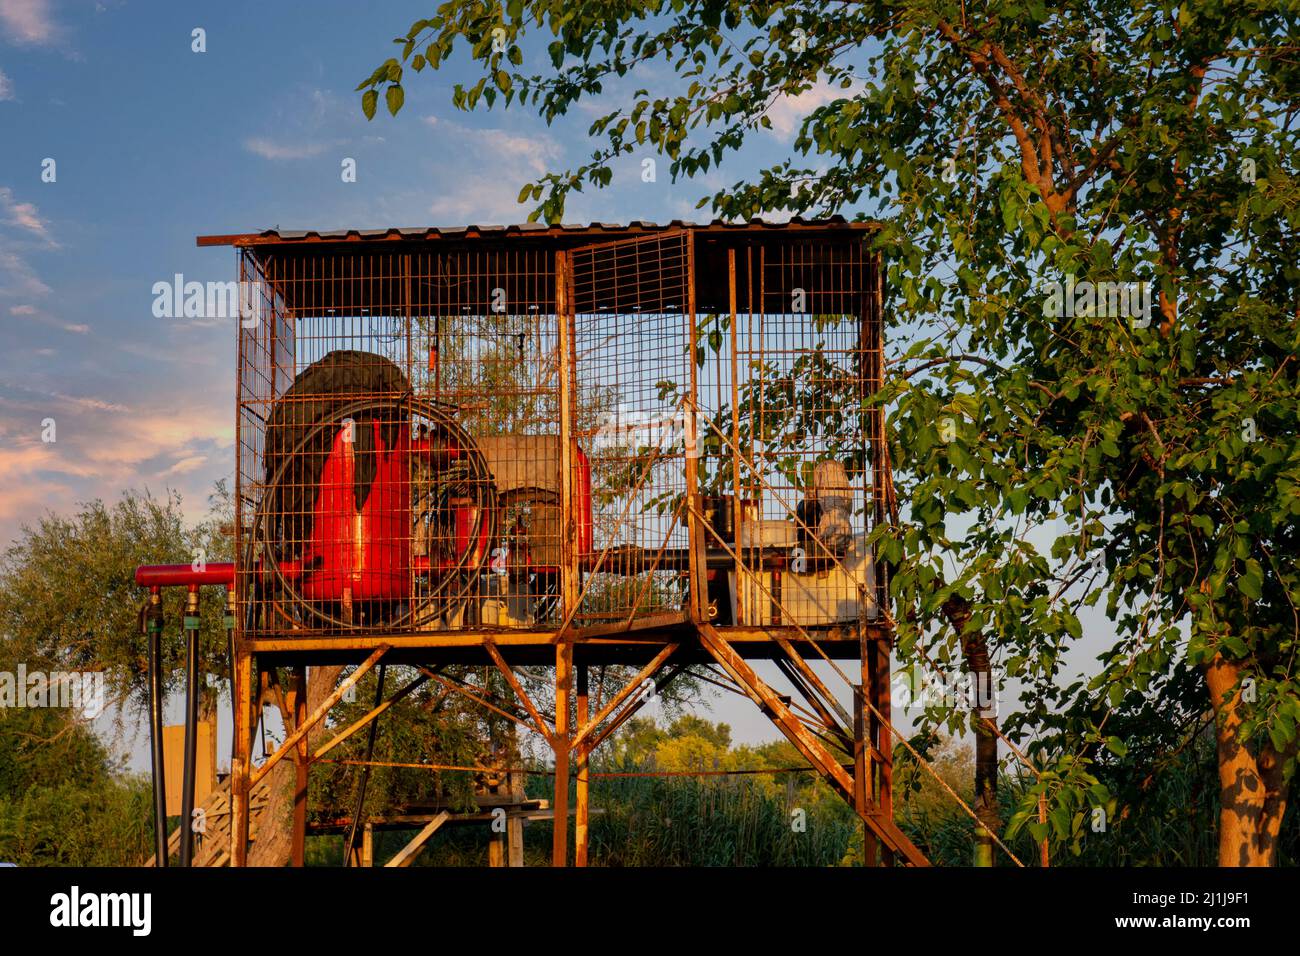 Water motor in cage used for drip irrigation. red watering engine. Sunset. Stock Photo